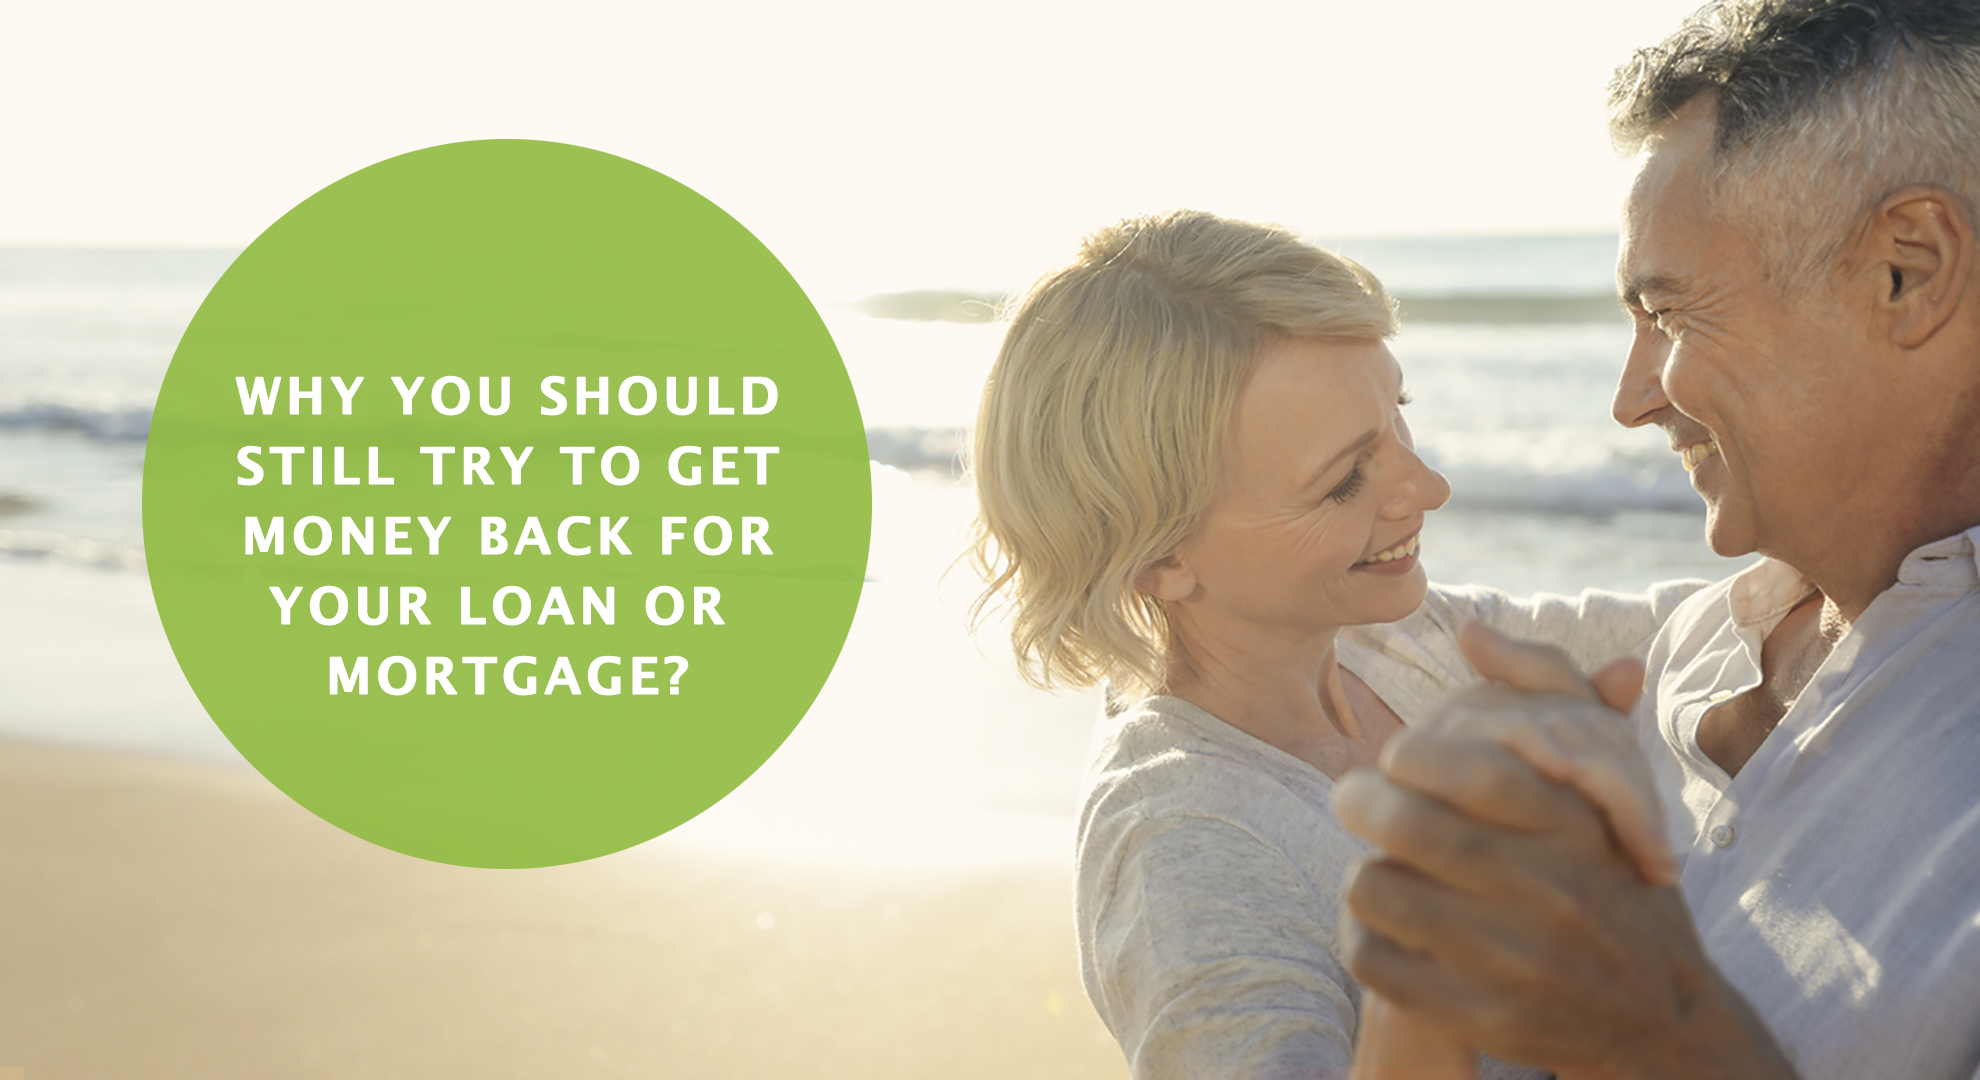 Why you should still try and get money back for your loan or mortgage?